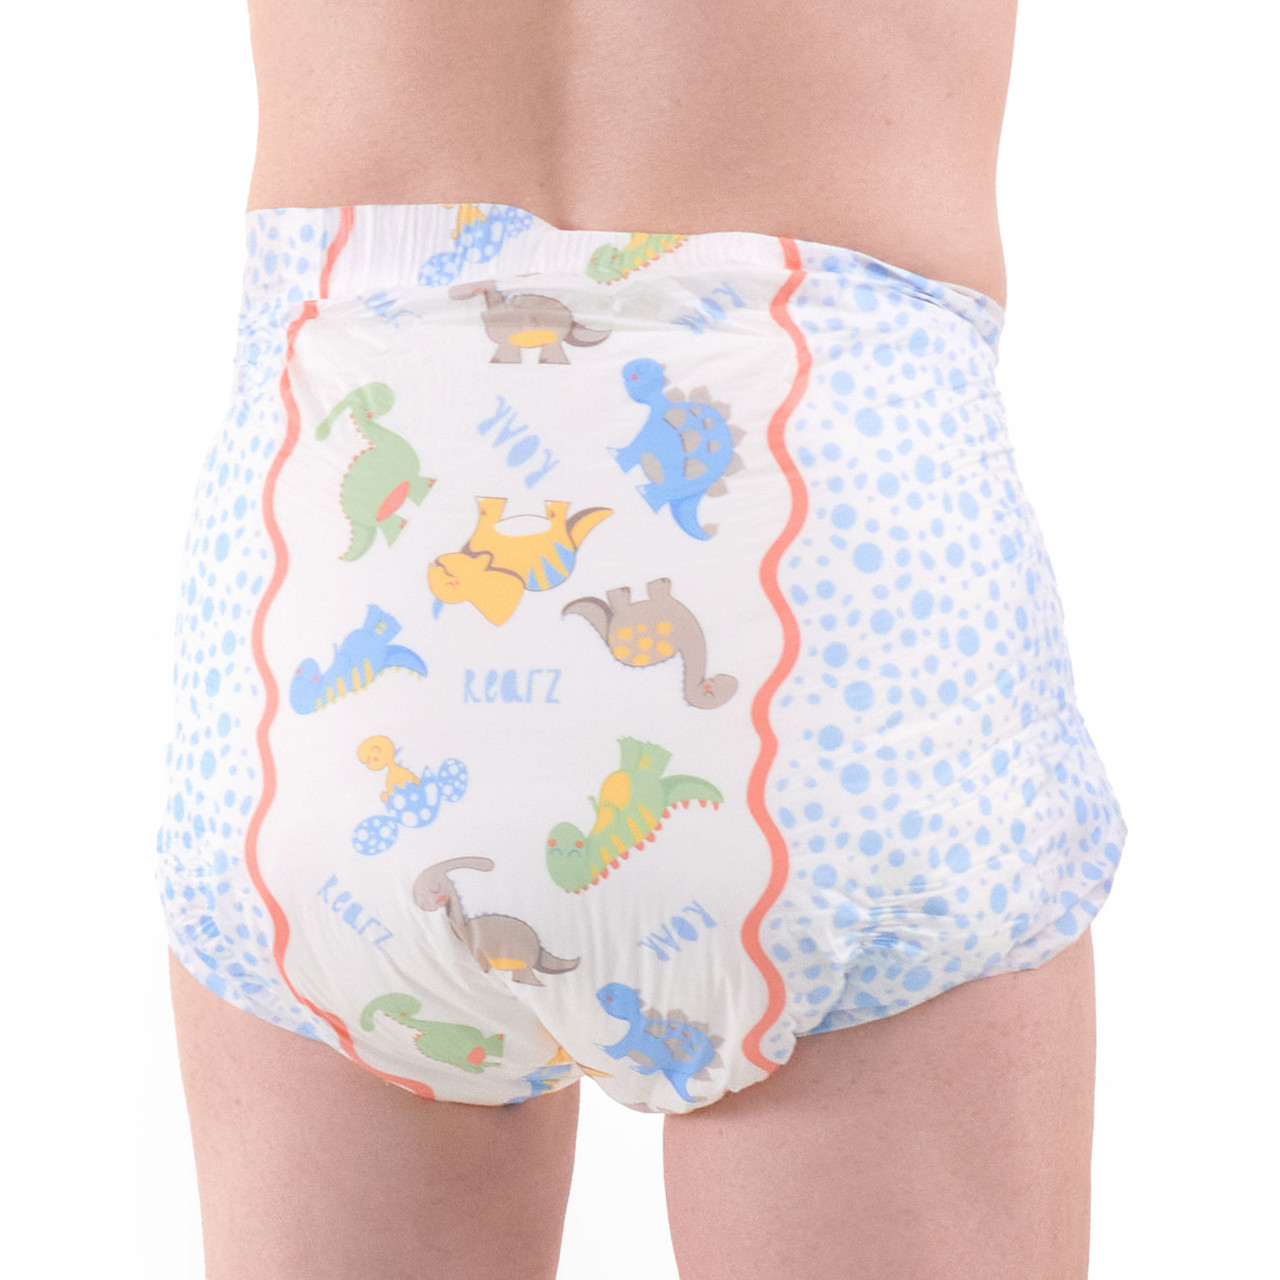 Rearz Mega Diapers - Experience the latest in ABDL diaper